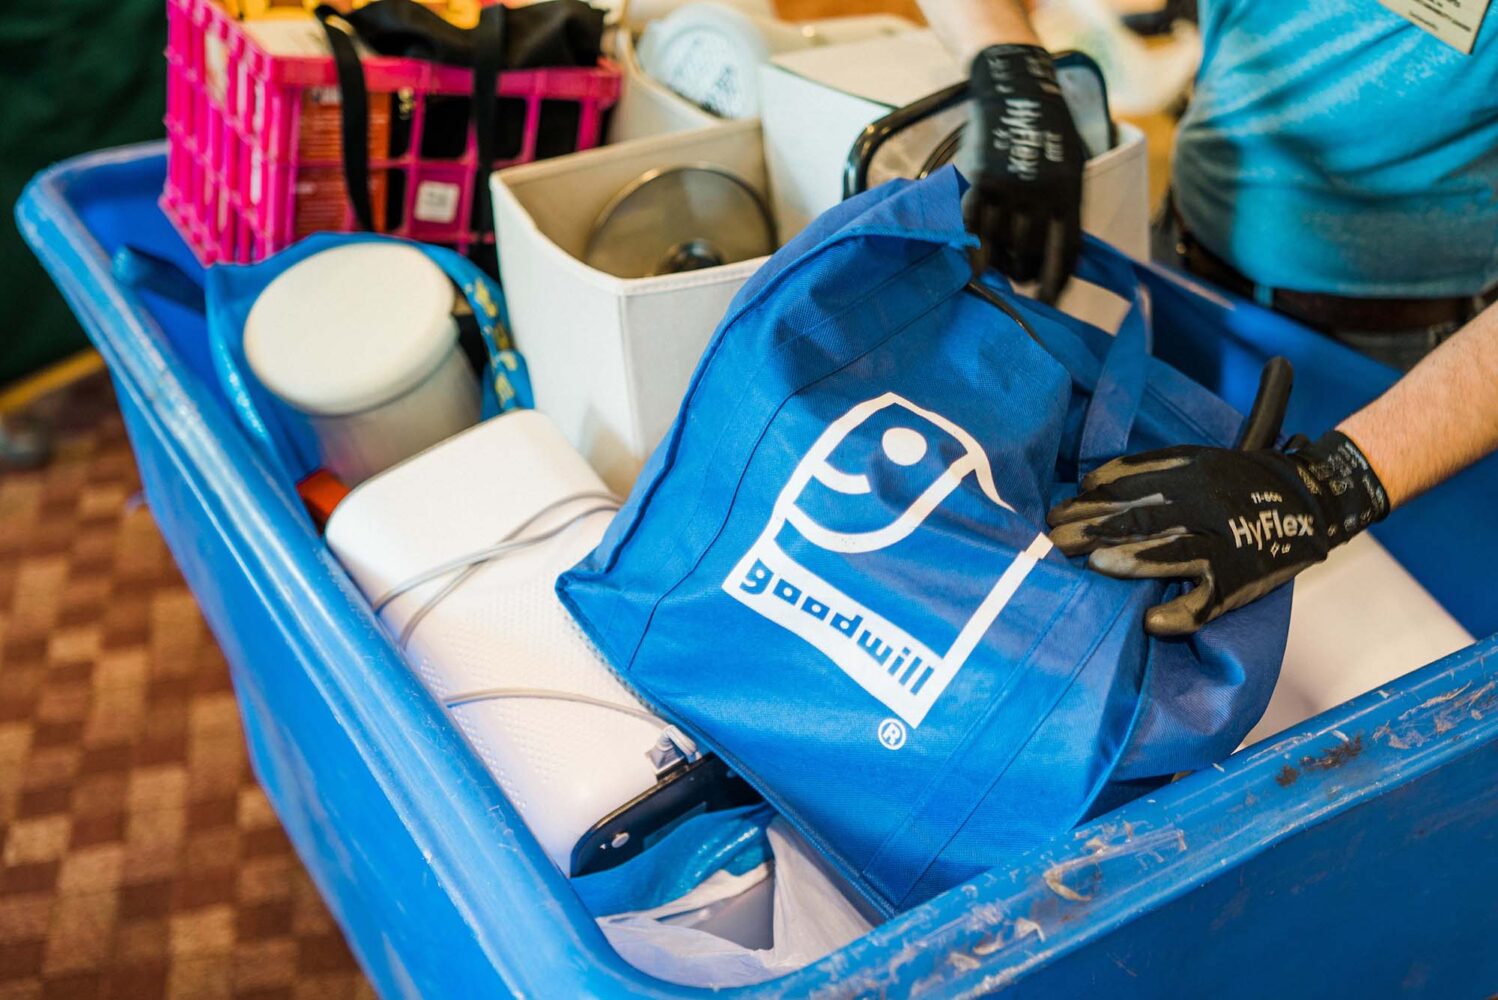 Photo: A picture of a blue tote bag with the "Goodwill" logo inside of a large, blue donation bin